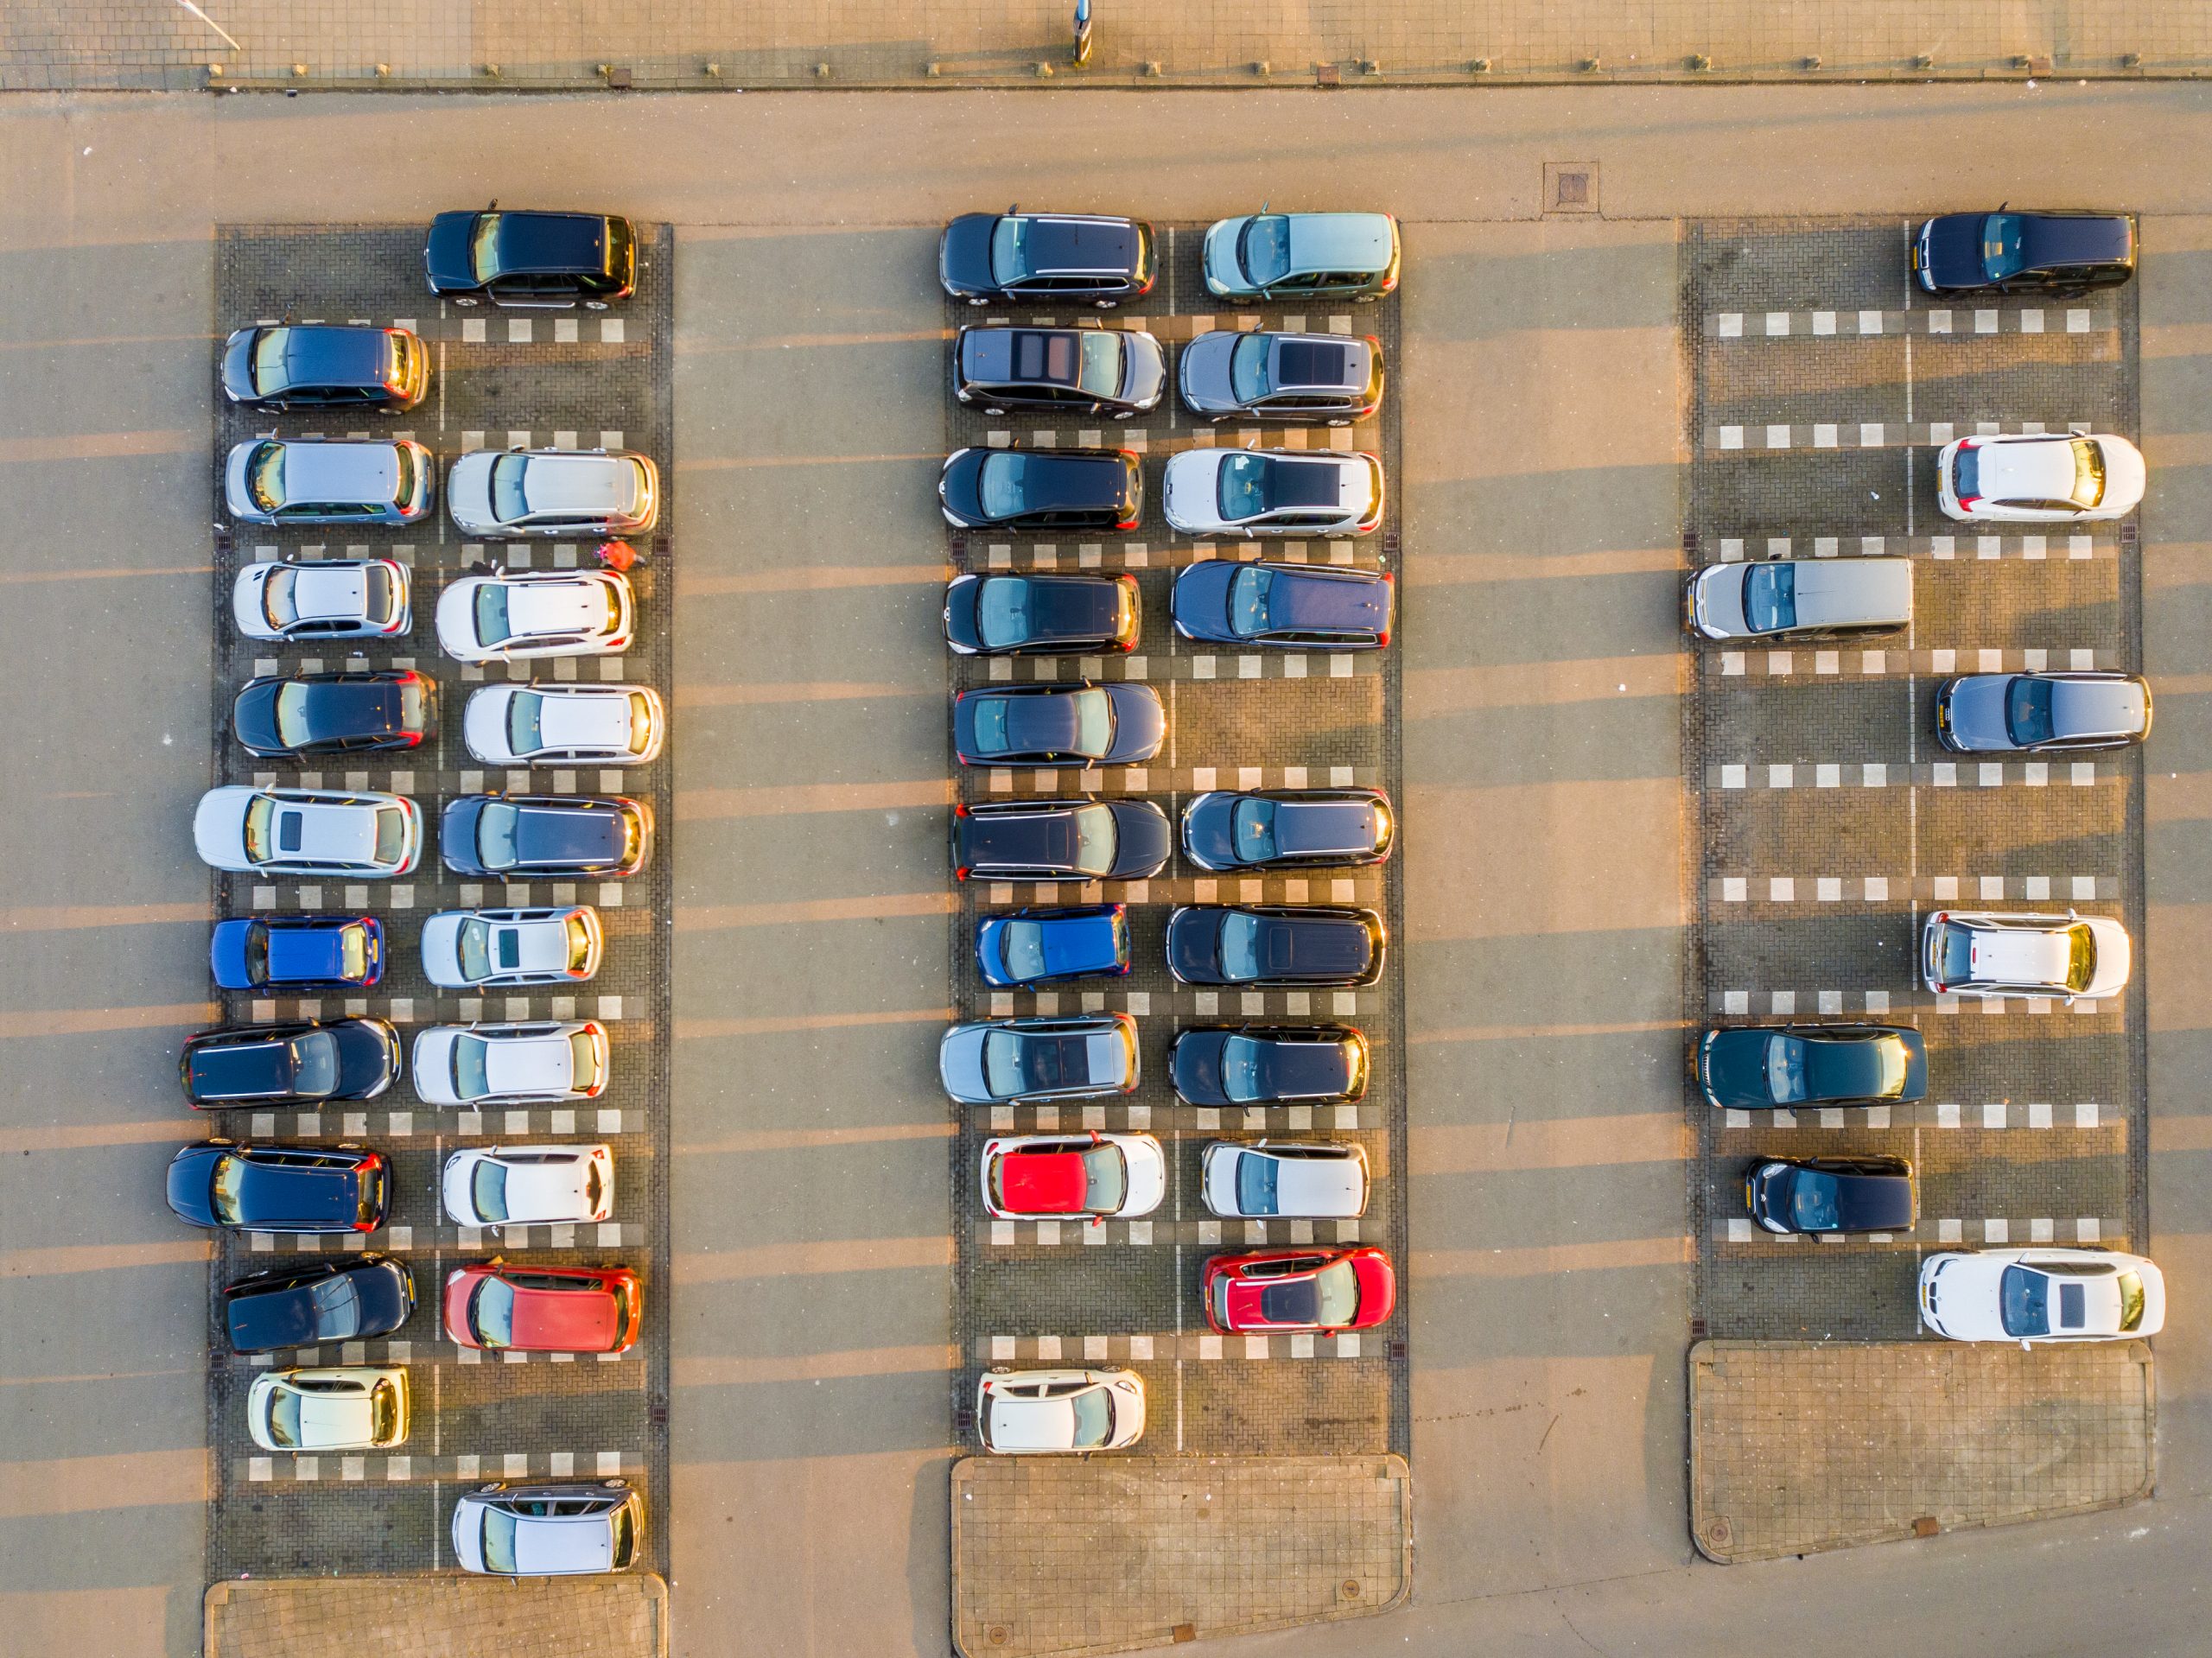 Parking Lots – Adding Value to Your Business